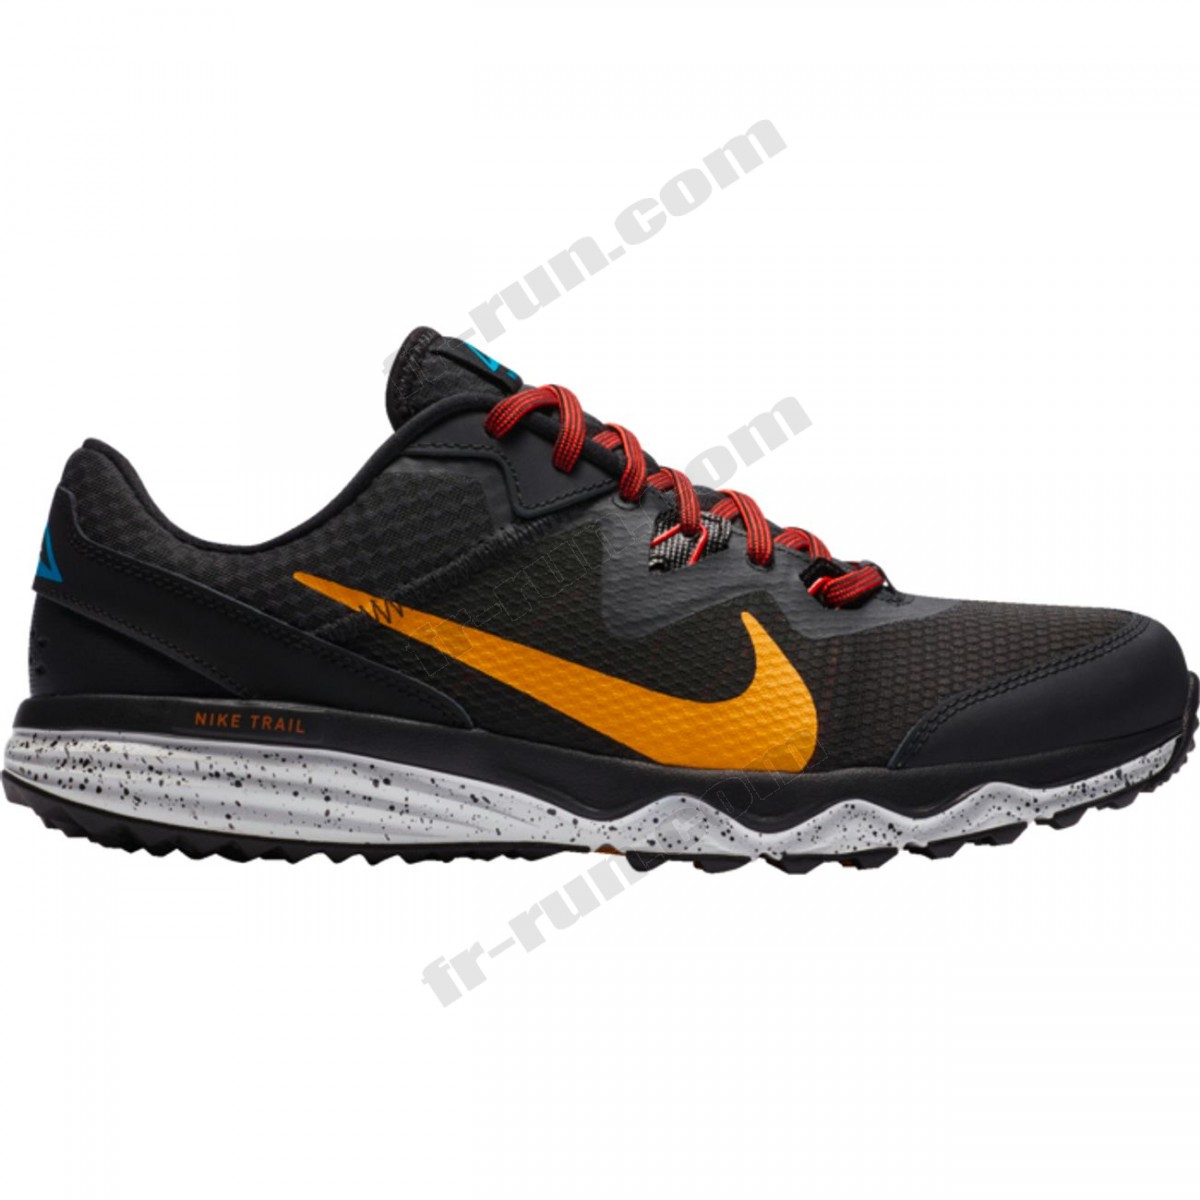 Nike/CHAUSSURES BASSES Trail homme NIKE NIKE JUNIPER TRAIL √ Nouveau style √ Soldes - Nike/CHAUSSURES BASSES Trail homme NIKE NIKE JUNIPER TRAIL √ Nouveau style √ Soldes